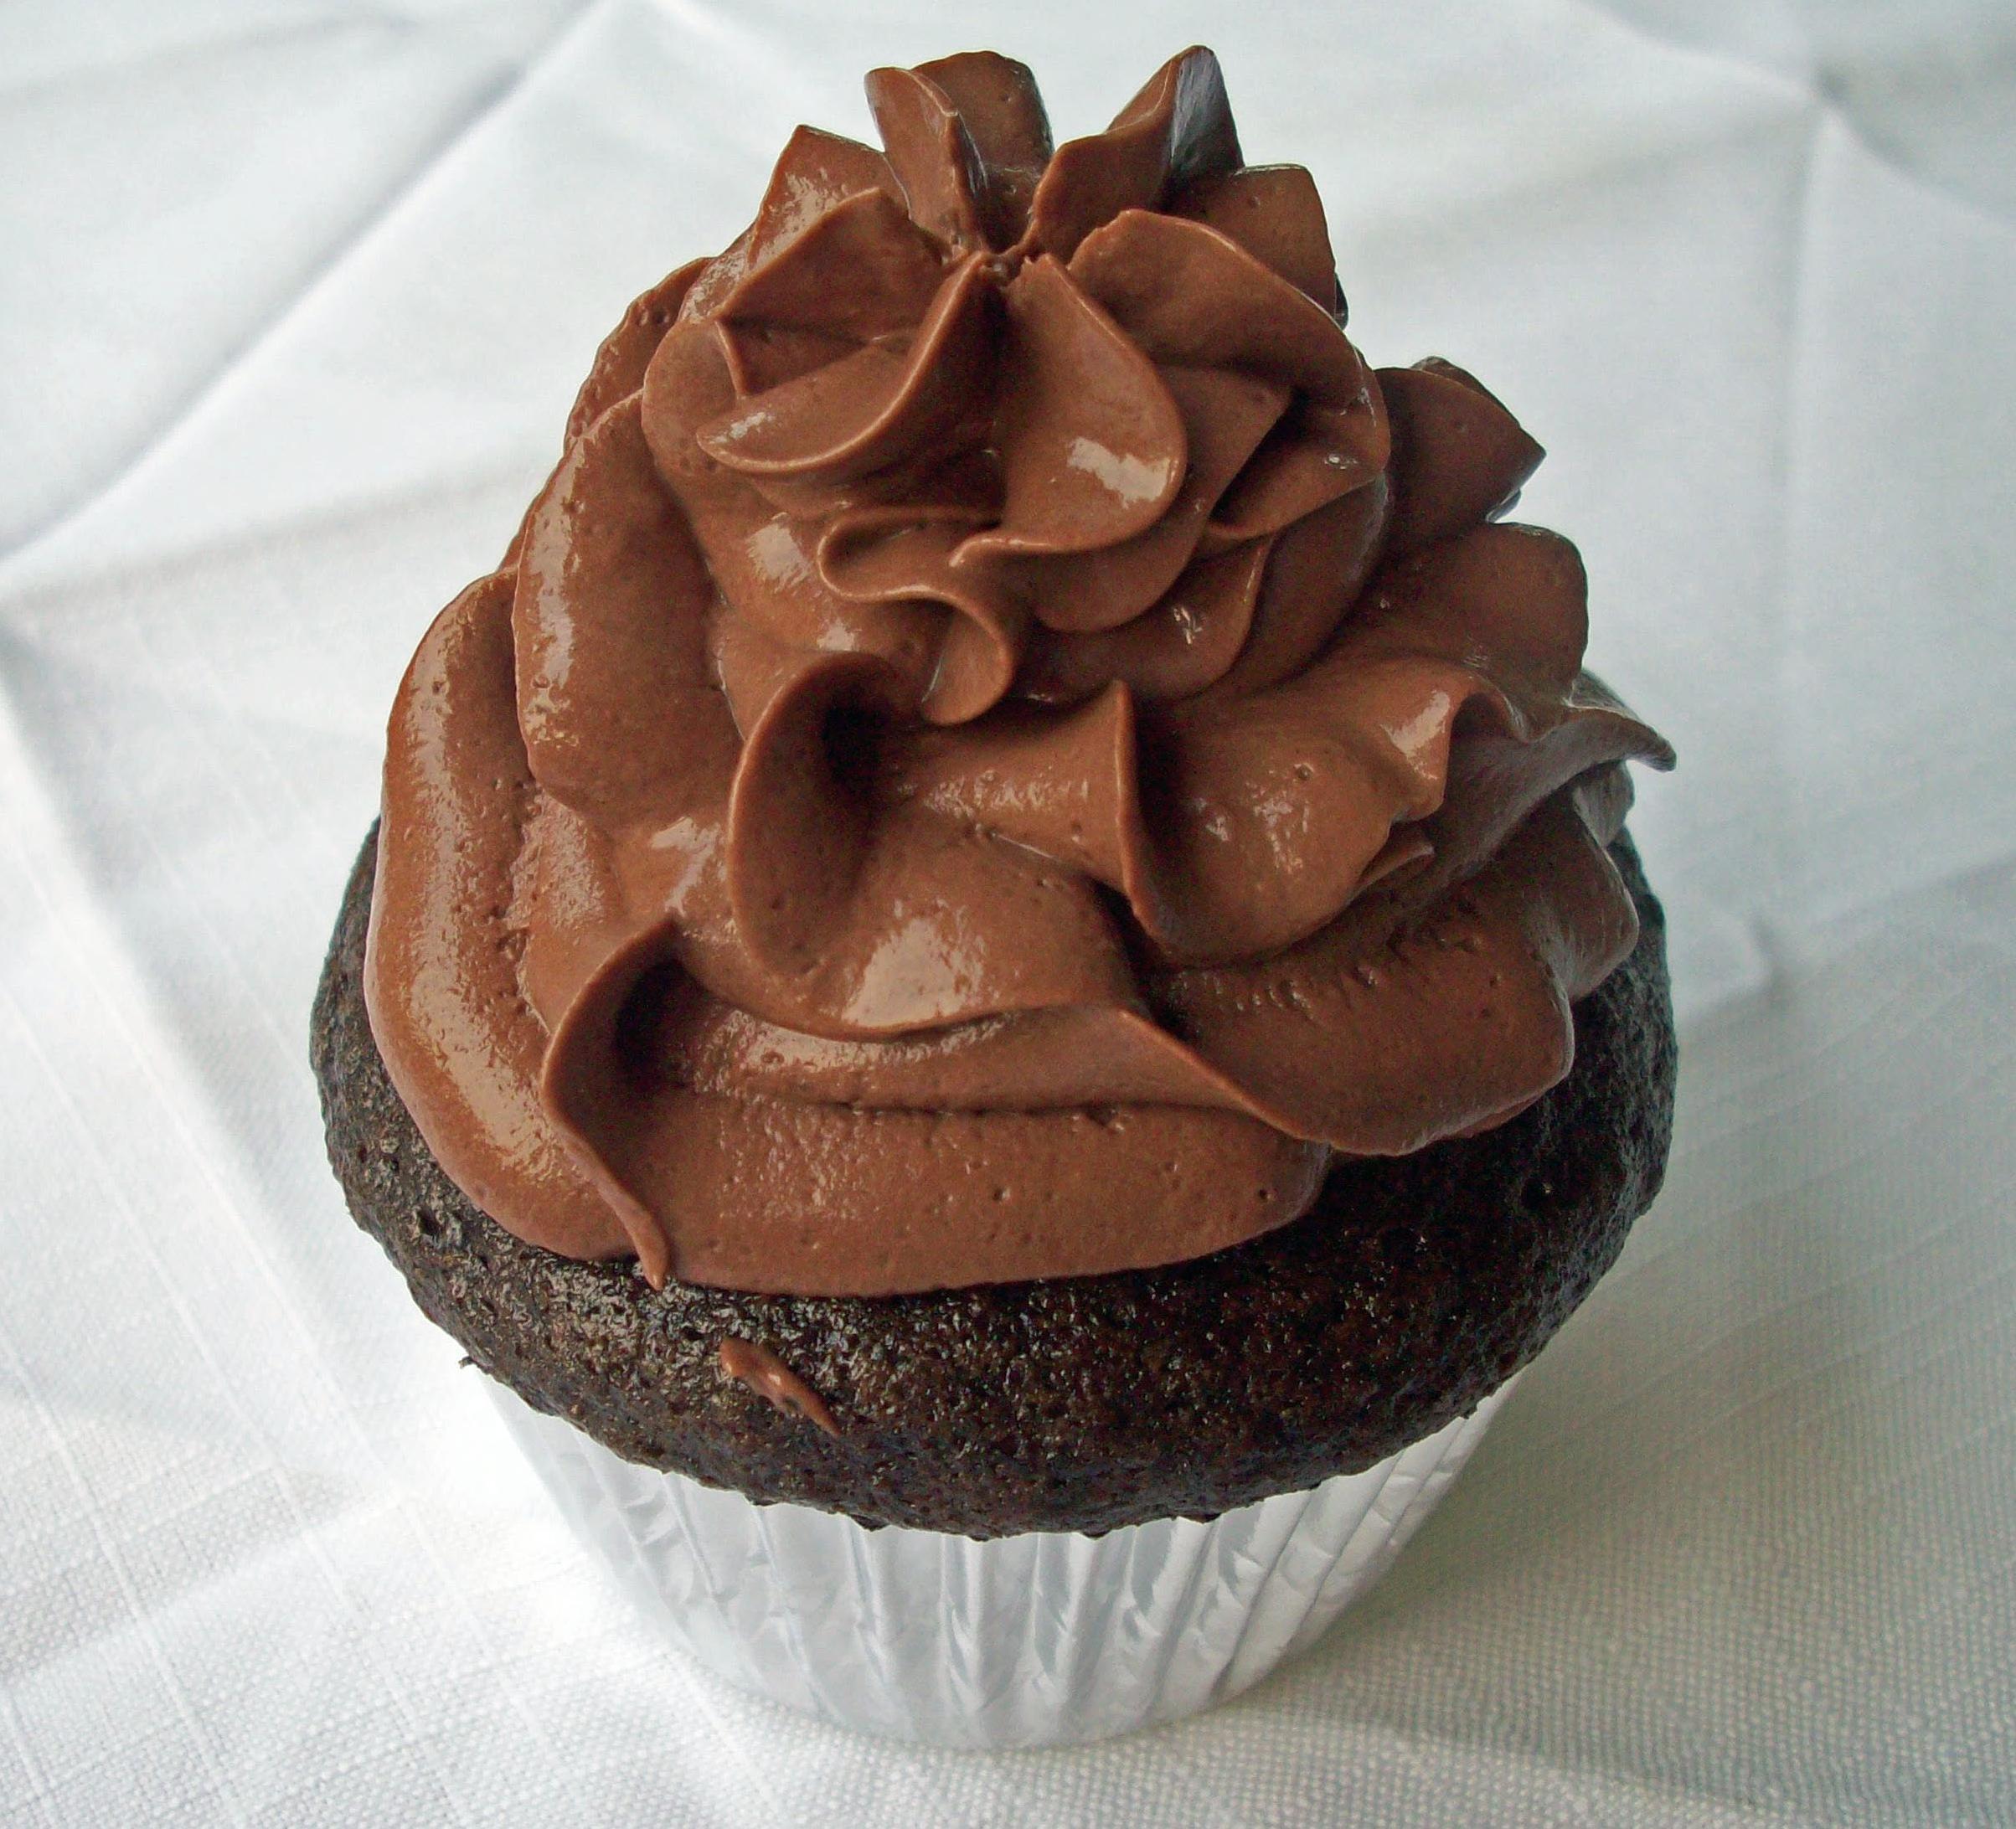 Vegan Chocolate Cupcakes With Chocolate Mousse Topping